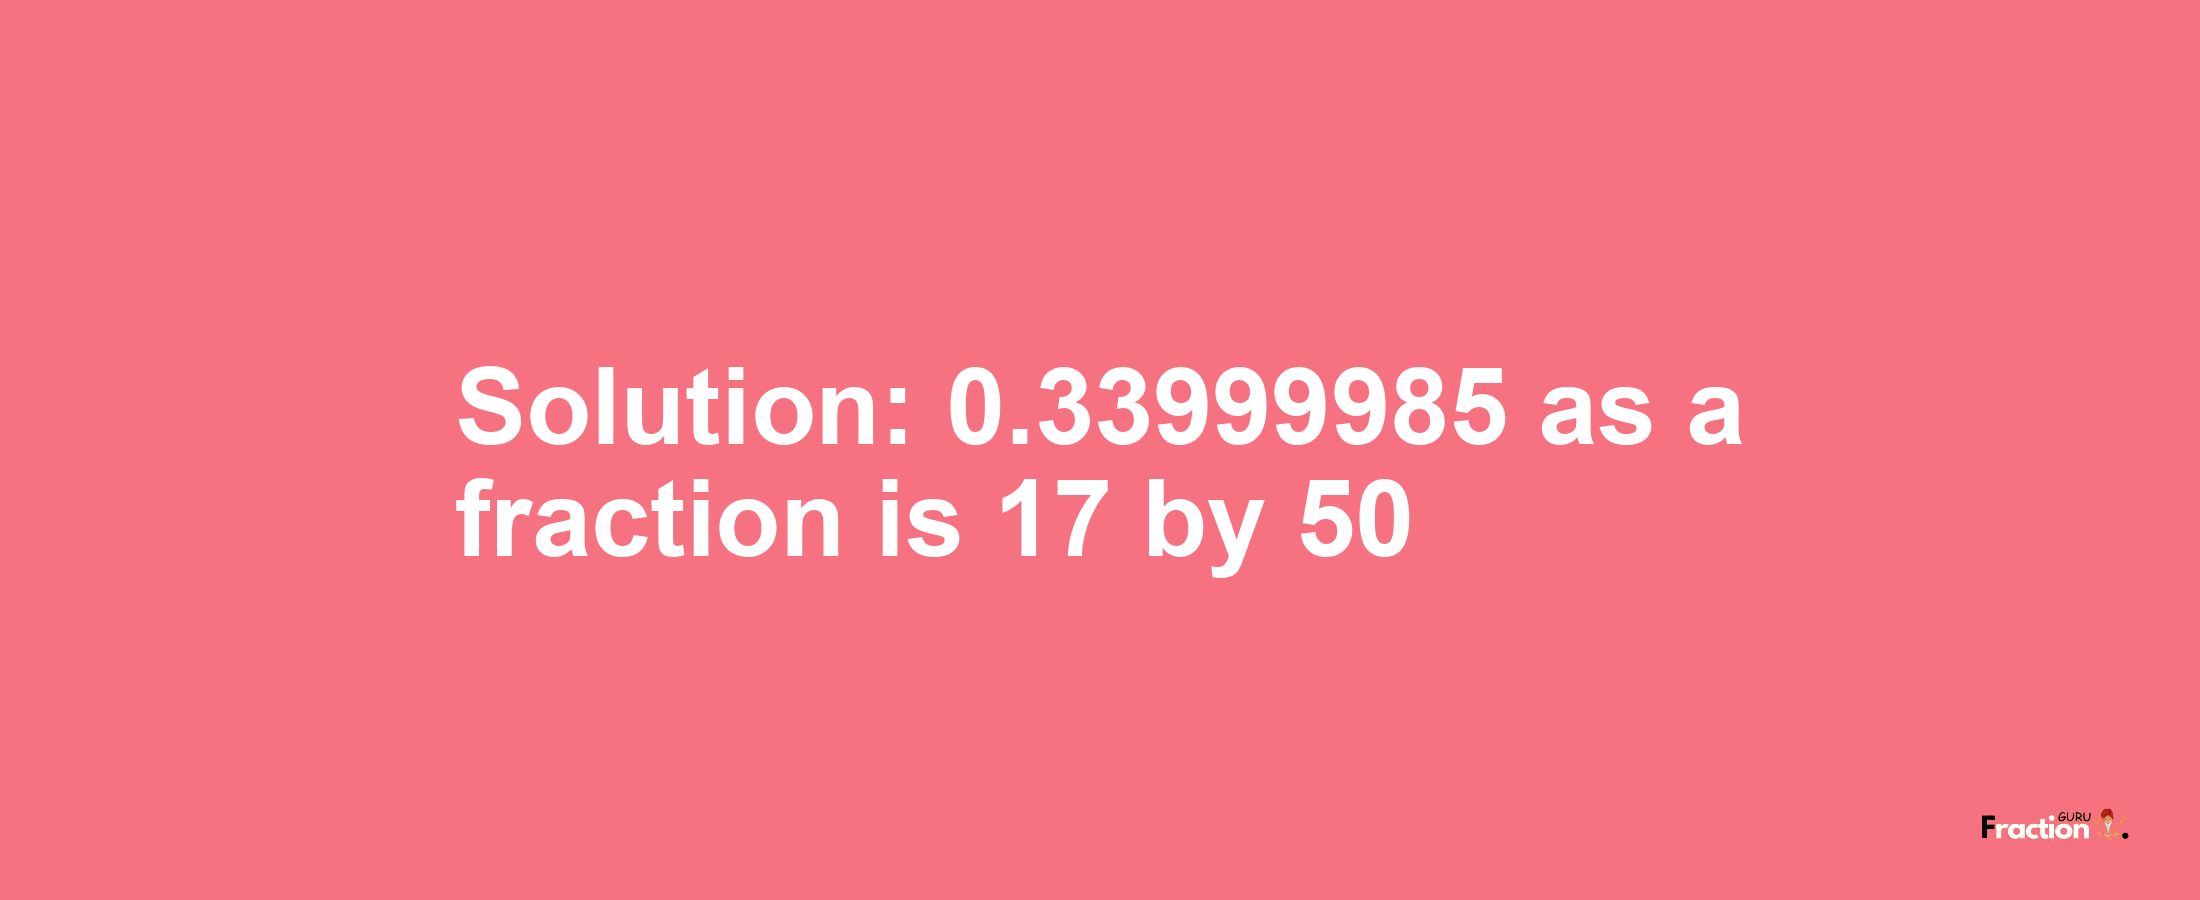 Solution:0.33999985 as a fraction is 17/50